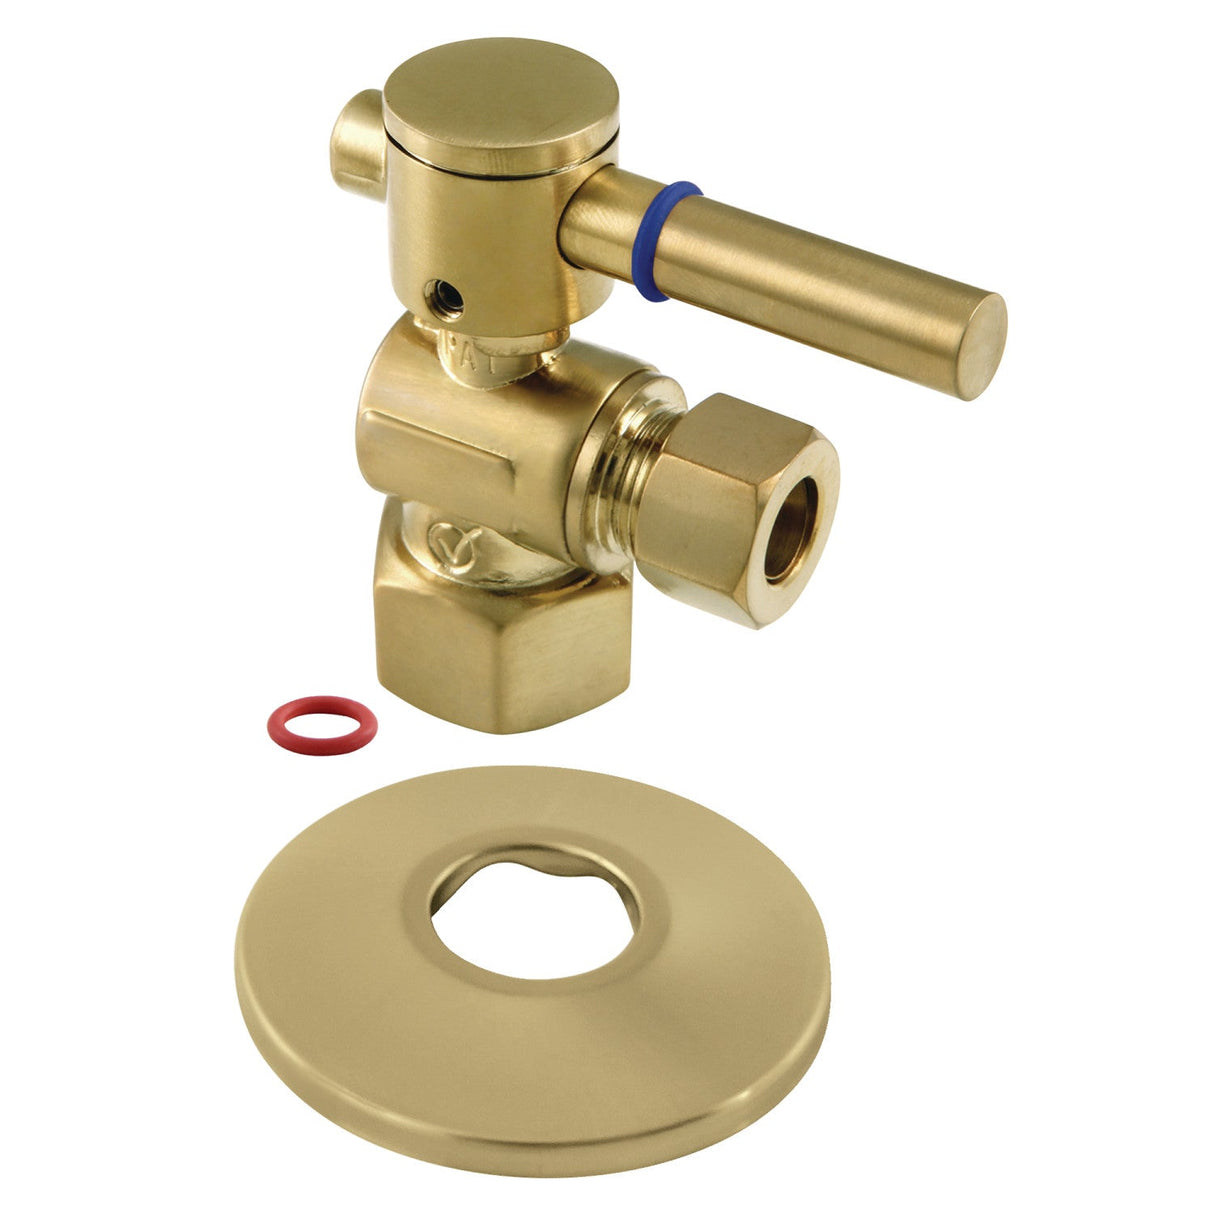 CC43107DLK 1/2-Inch FIP x 3/8-Inch OD Comp Quarter-Turn Angle Stop Valve with Flange, Brushed Brass